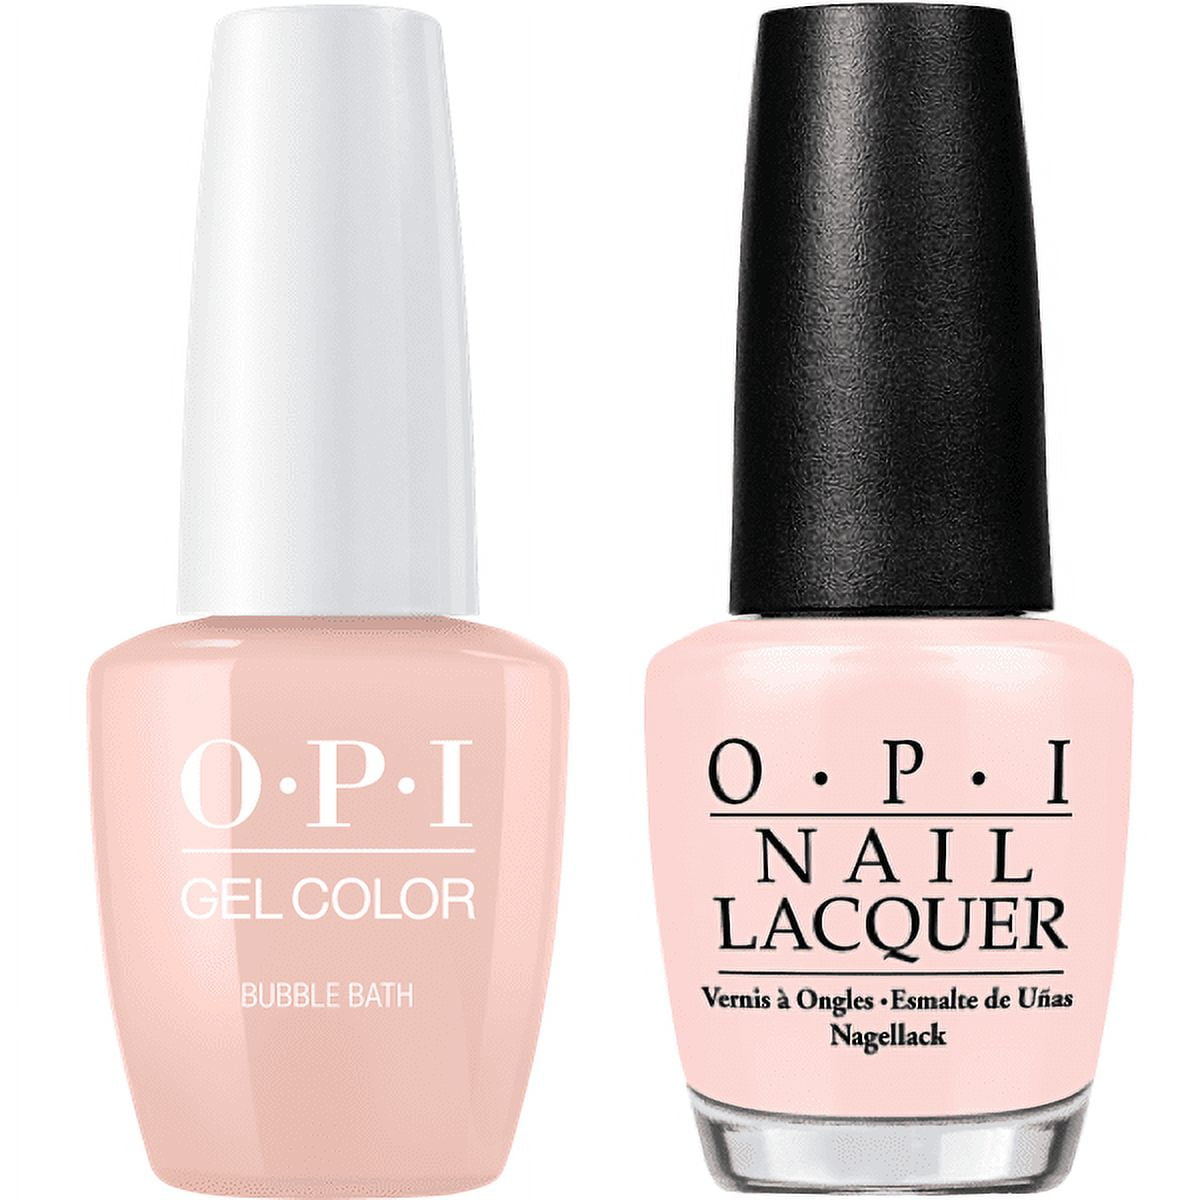 GelColor by OPI Soak-Off Gel Lacquer nail polish - Bubble Bath - GC S86 -  Pack of 1 with Sleek Comb - Walmart.com